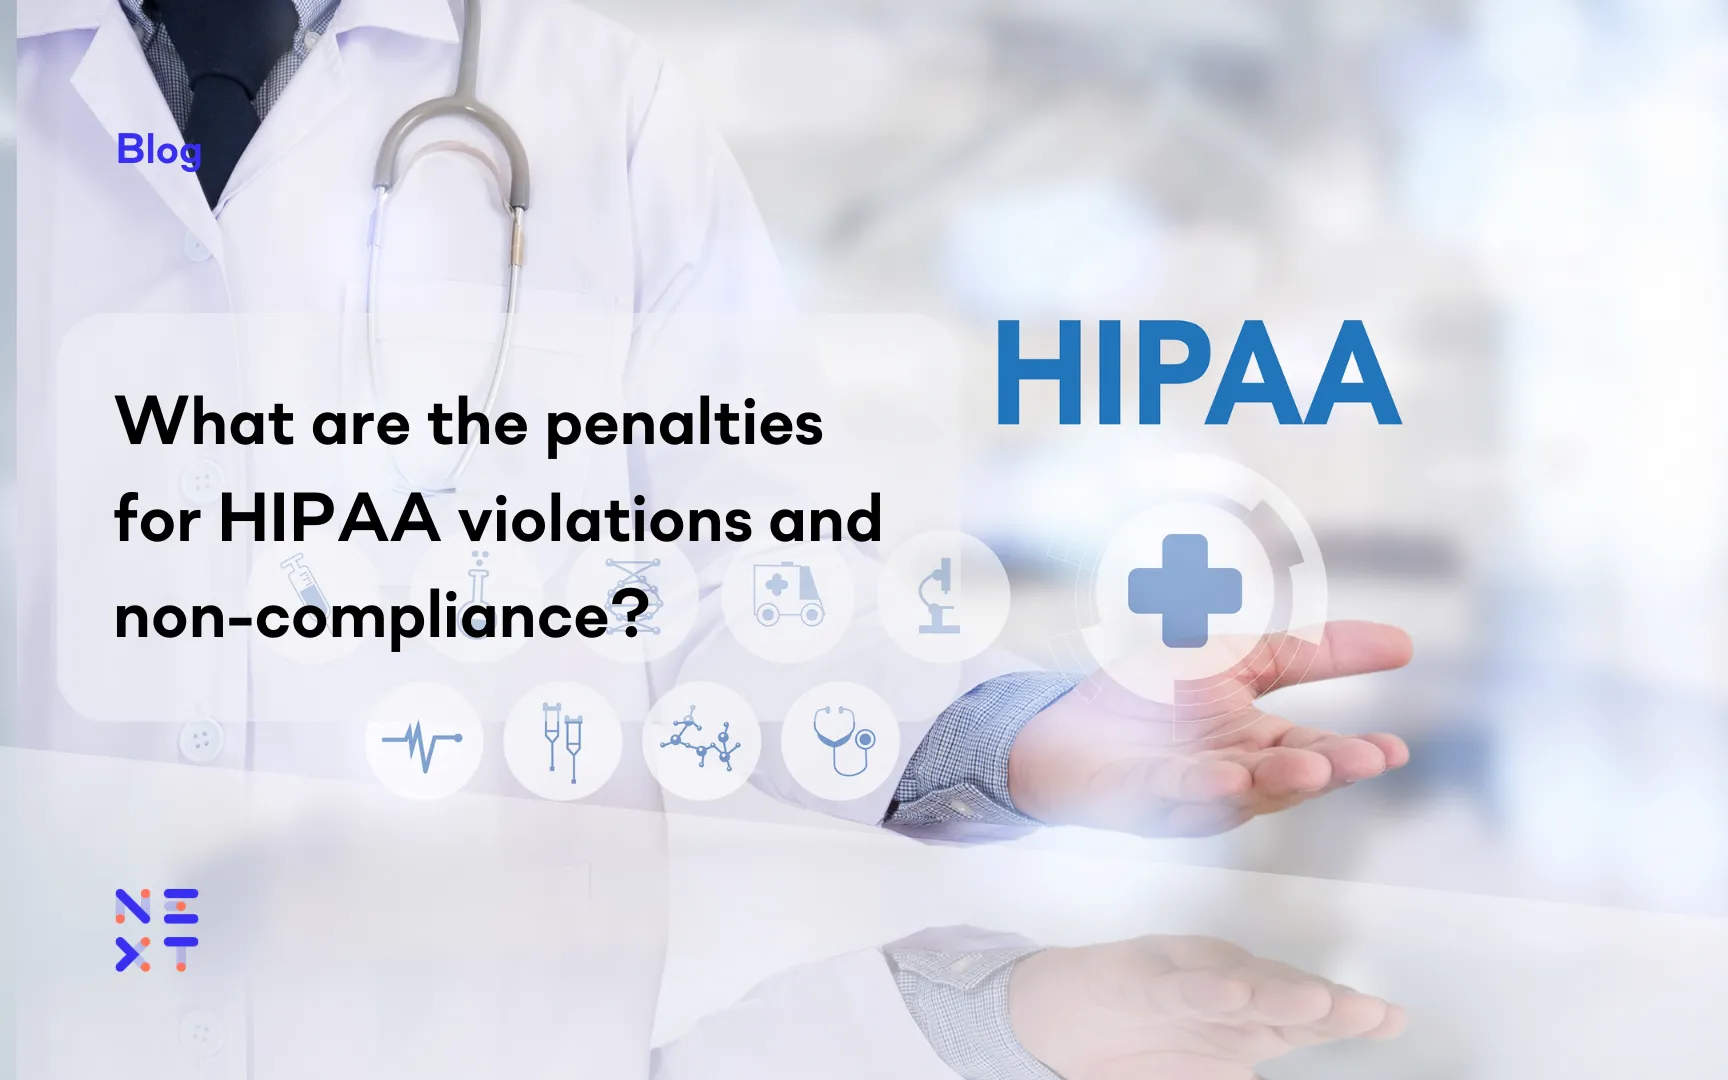 What are the penalties for HIPAA violations and non-compliance?